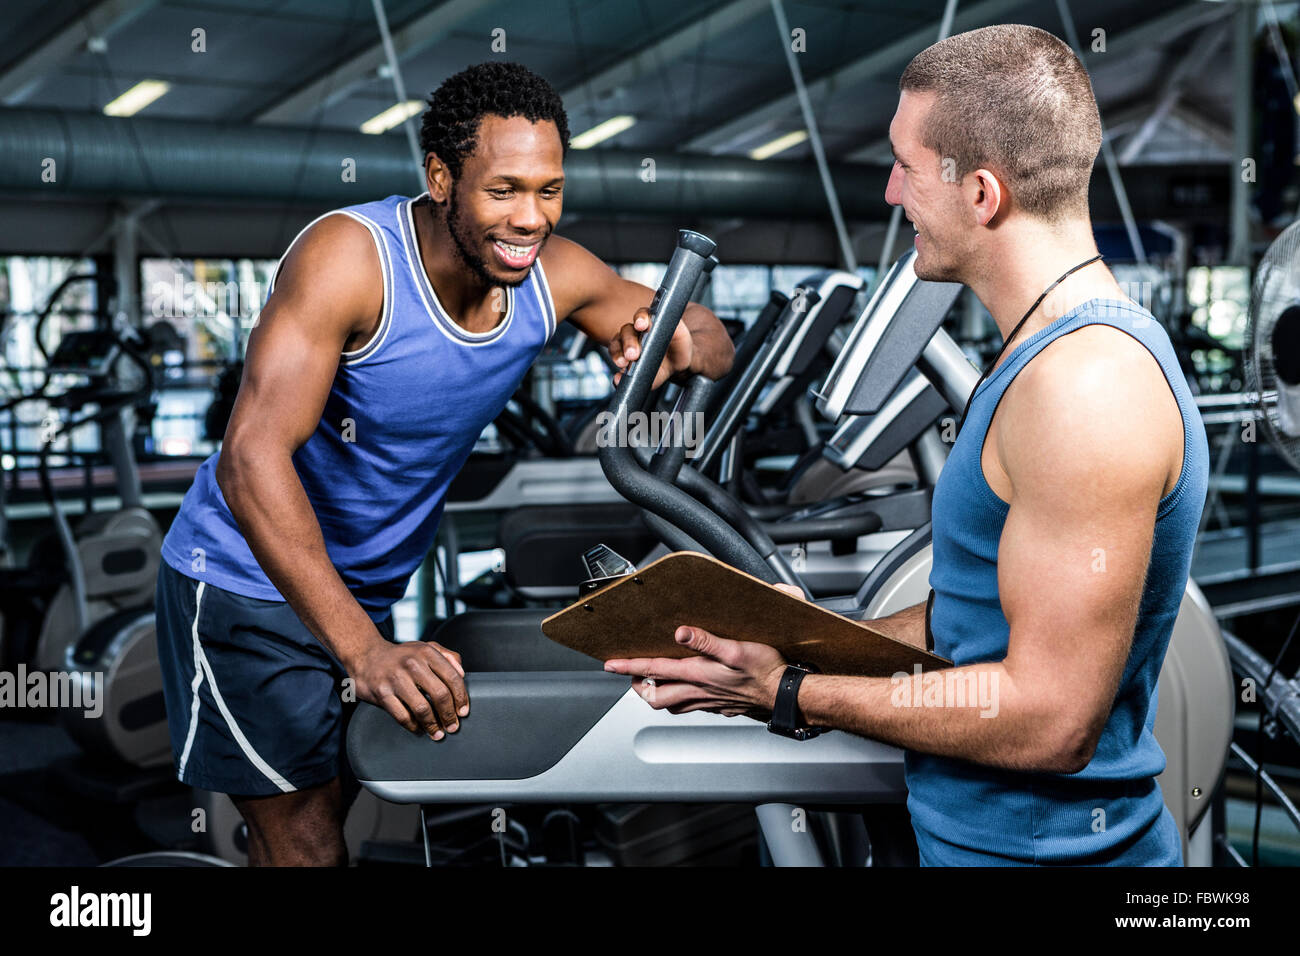 Muscular man discussing performance with trainer Stock Photo